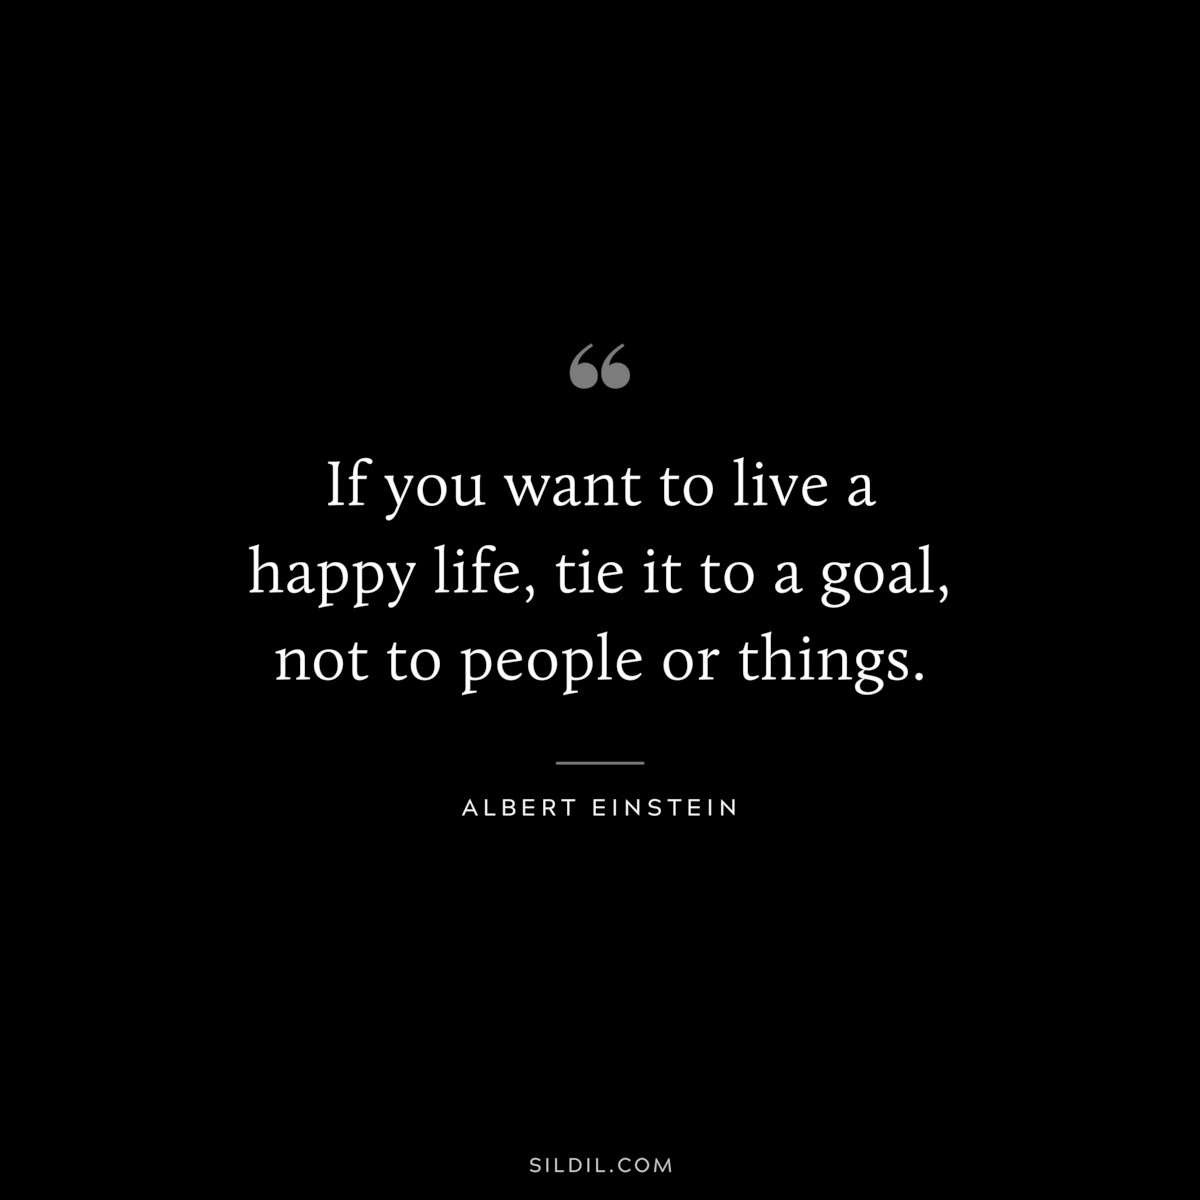 If you want to live a happy life, tie it to a goal, not to people or things. ― Albert Einstein